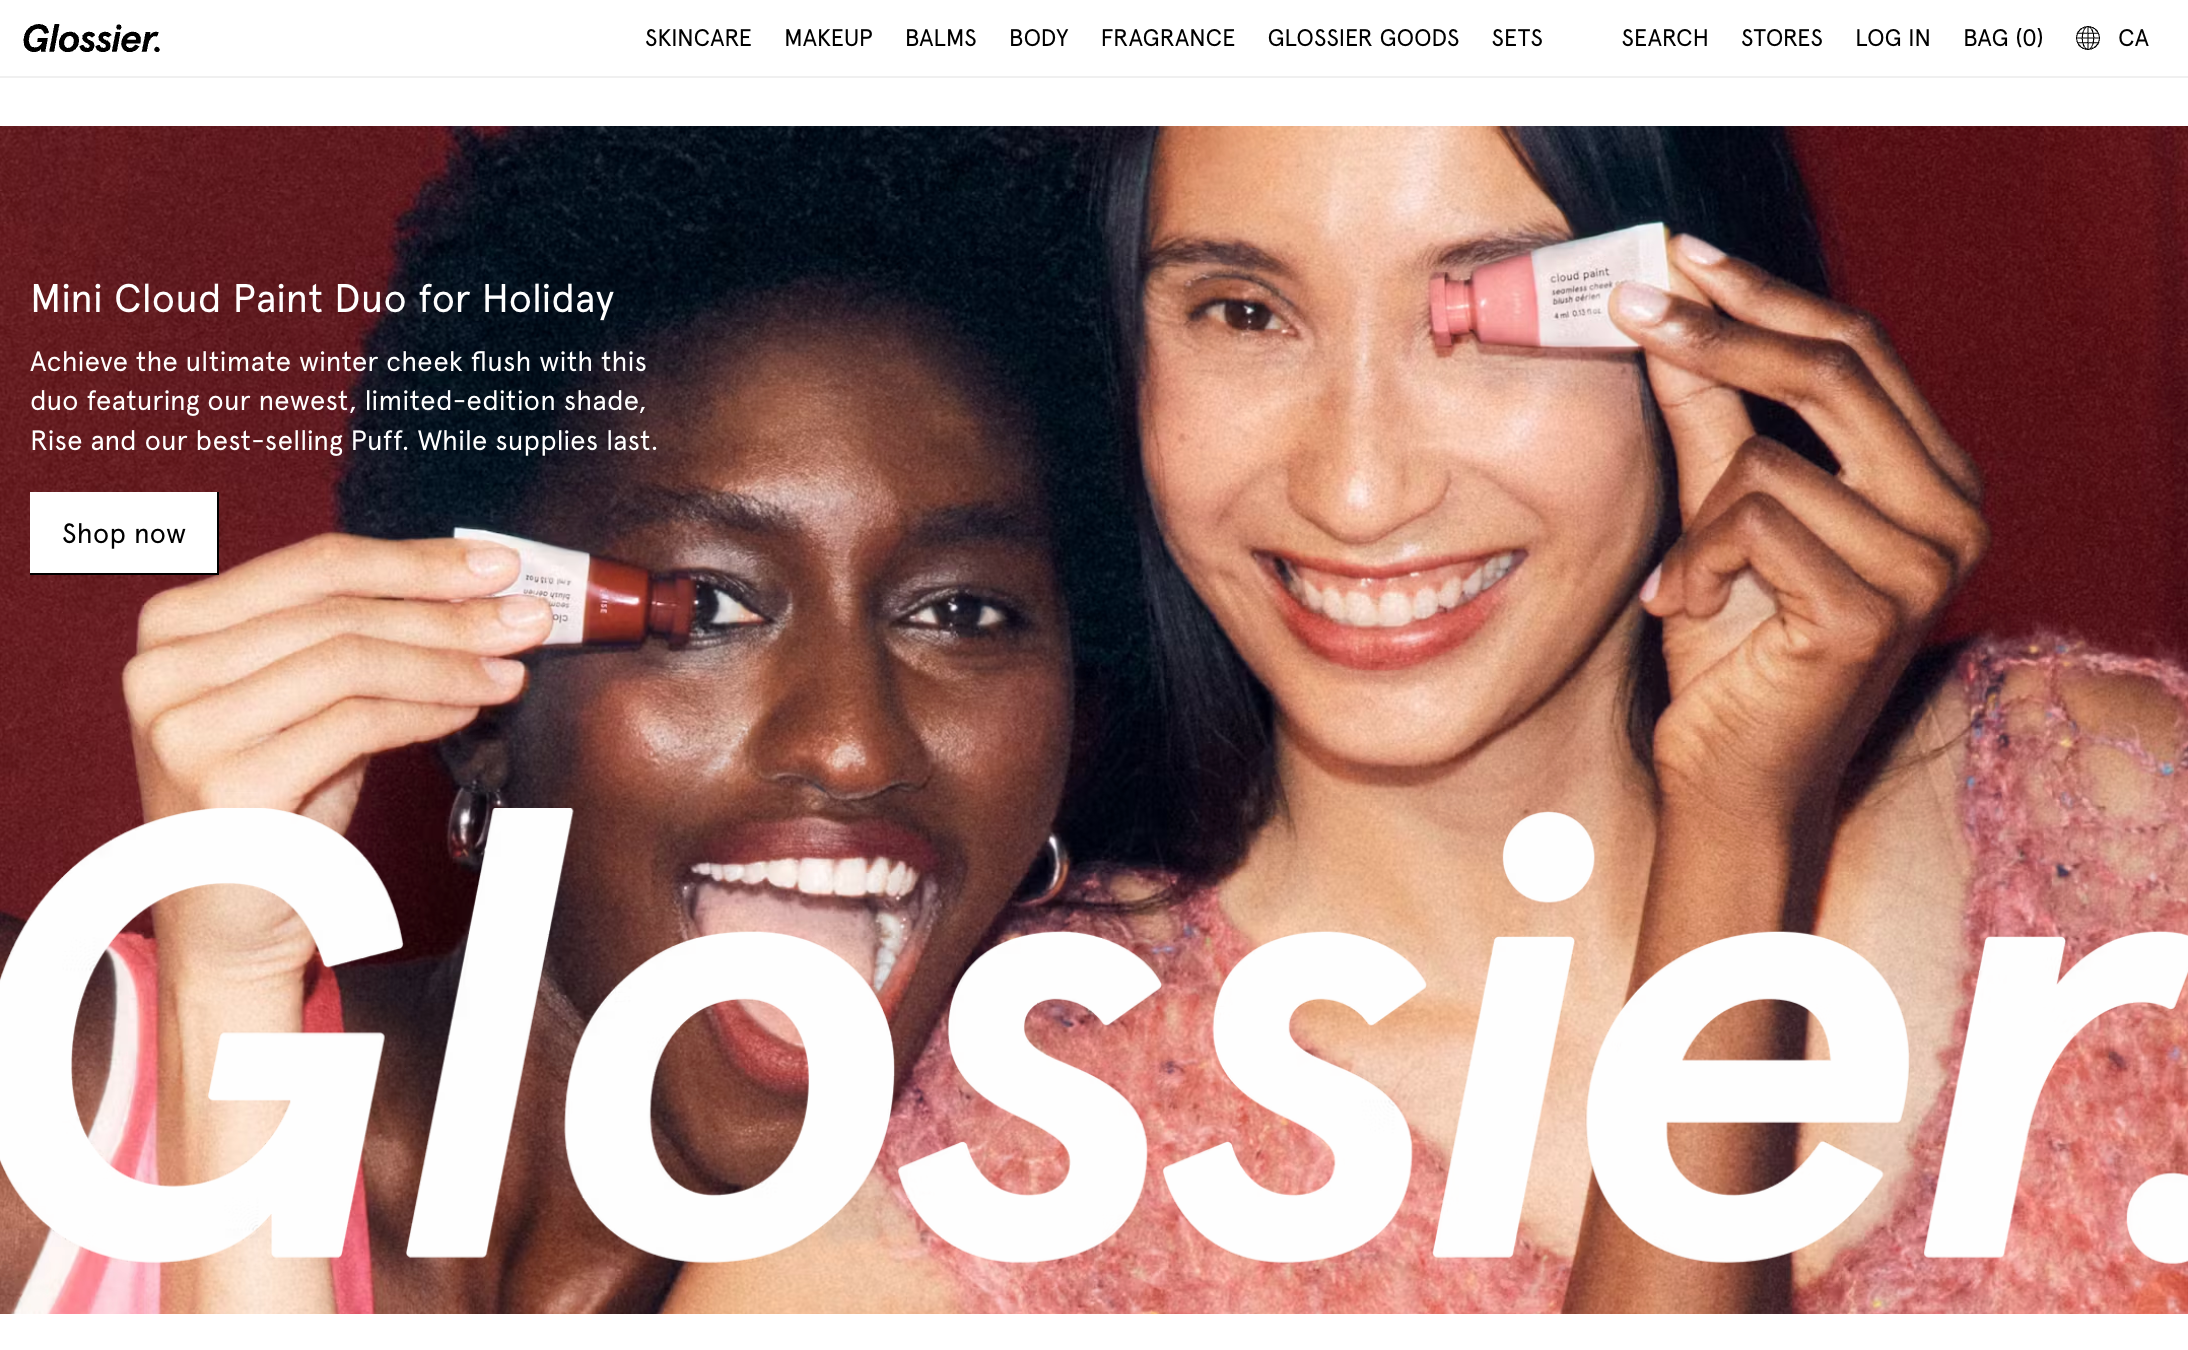 A page on Glossier's ecommerce website